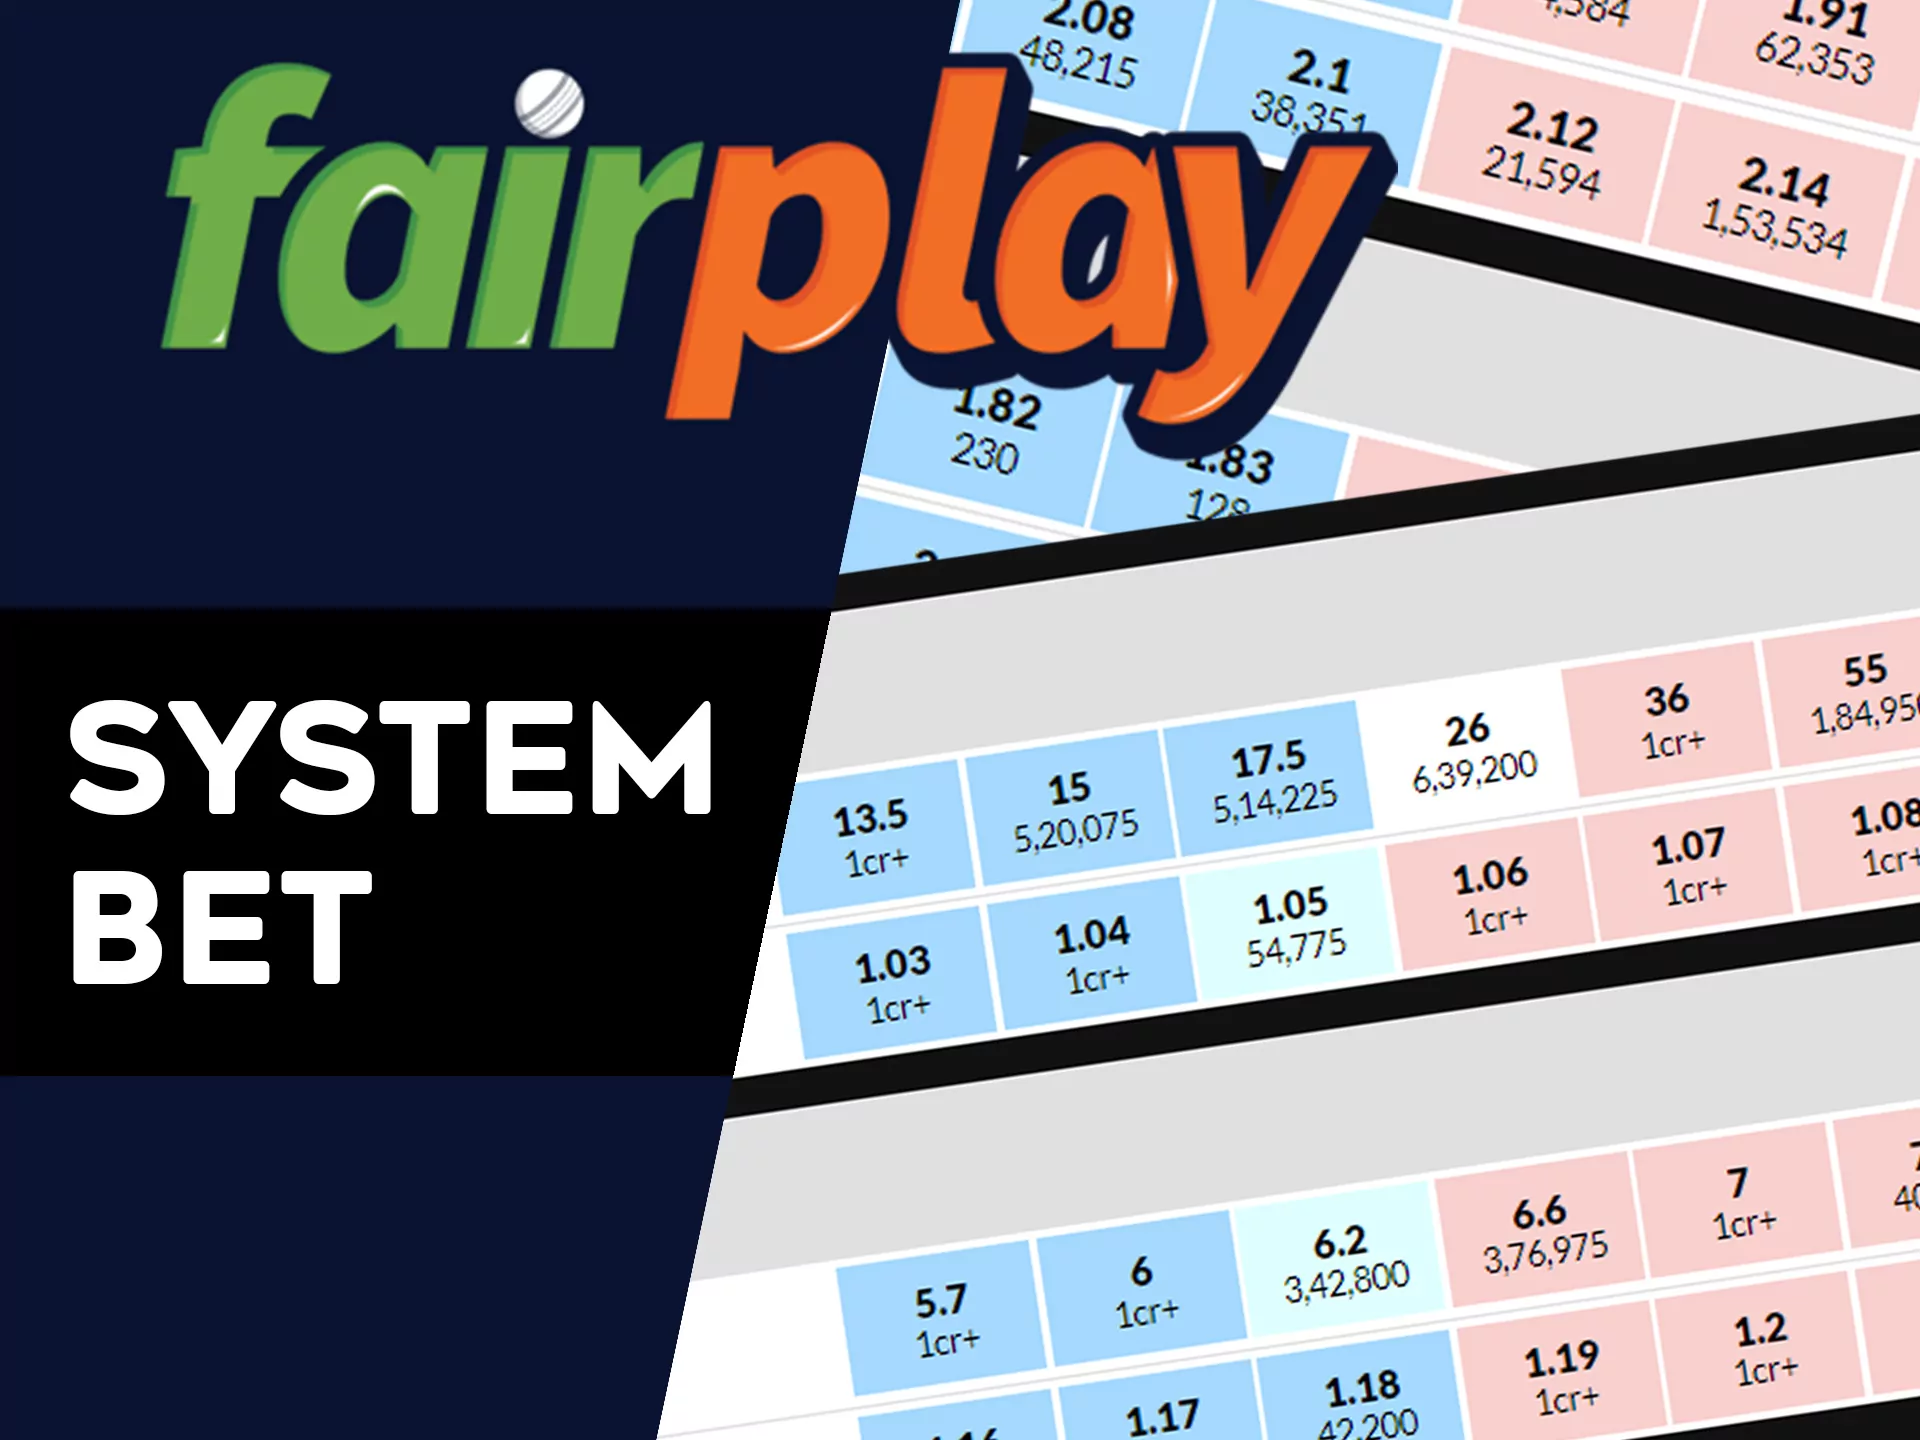 System bets are available for betting in the Fairplay sportsbook.